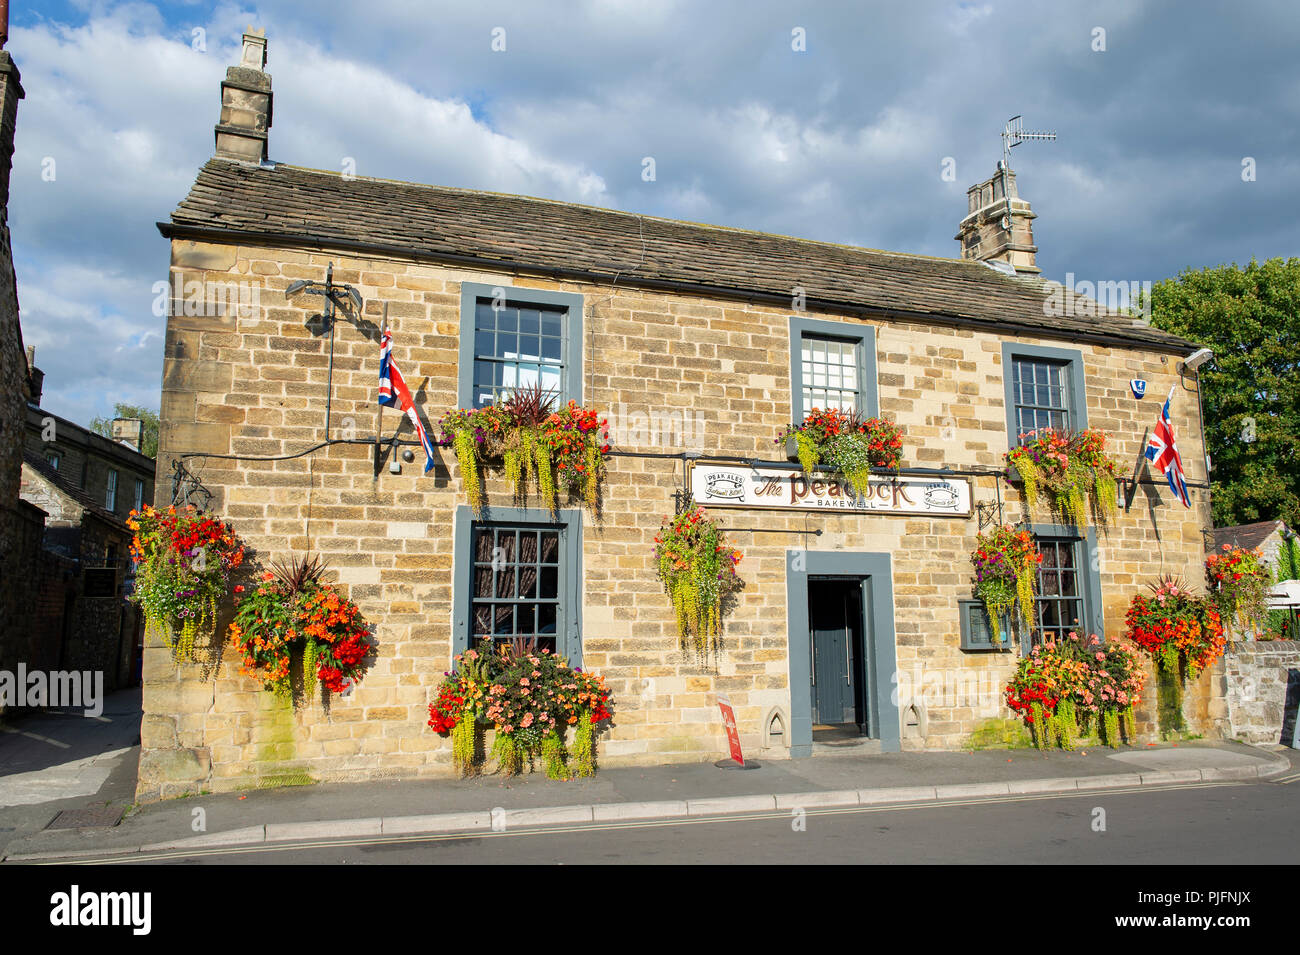 The Peacock Inn in Bakewell, Peak District National Park, Derbyshire Stock Photo